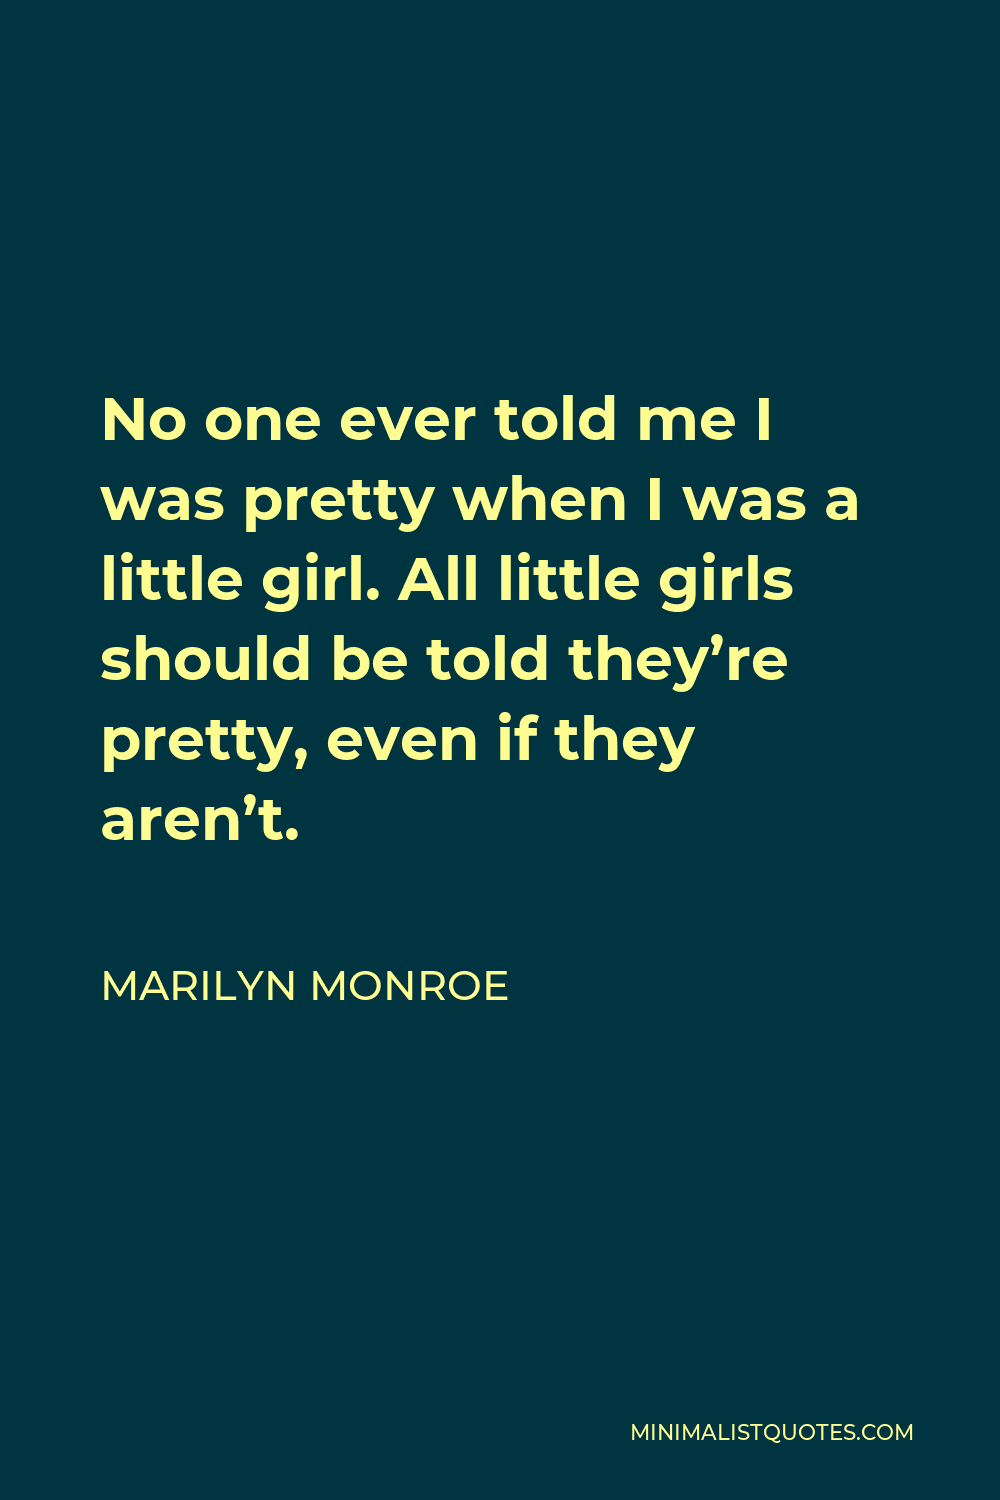 Marilyn Monroe Quote - No one ever told me I was pretty when I was a little girl. All little girls should be told they’re pretty, even if they aren’t.